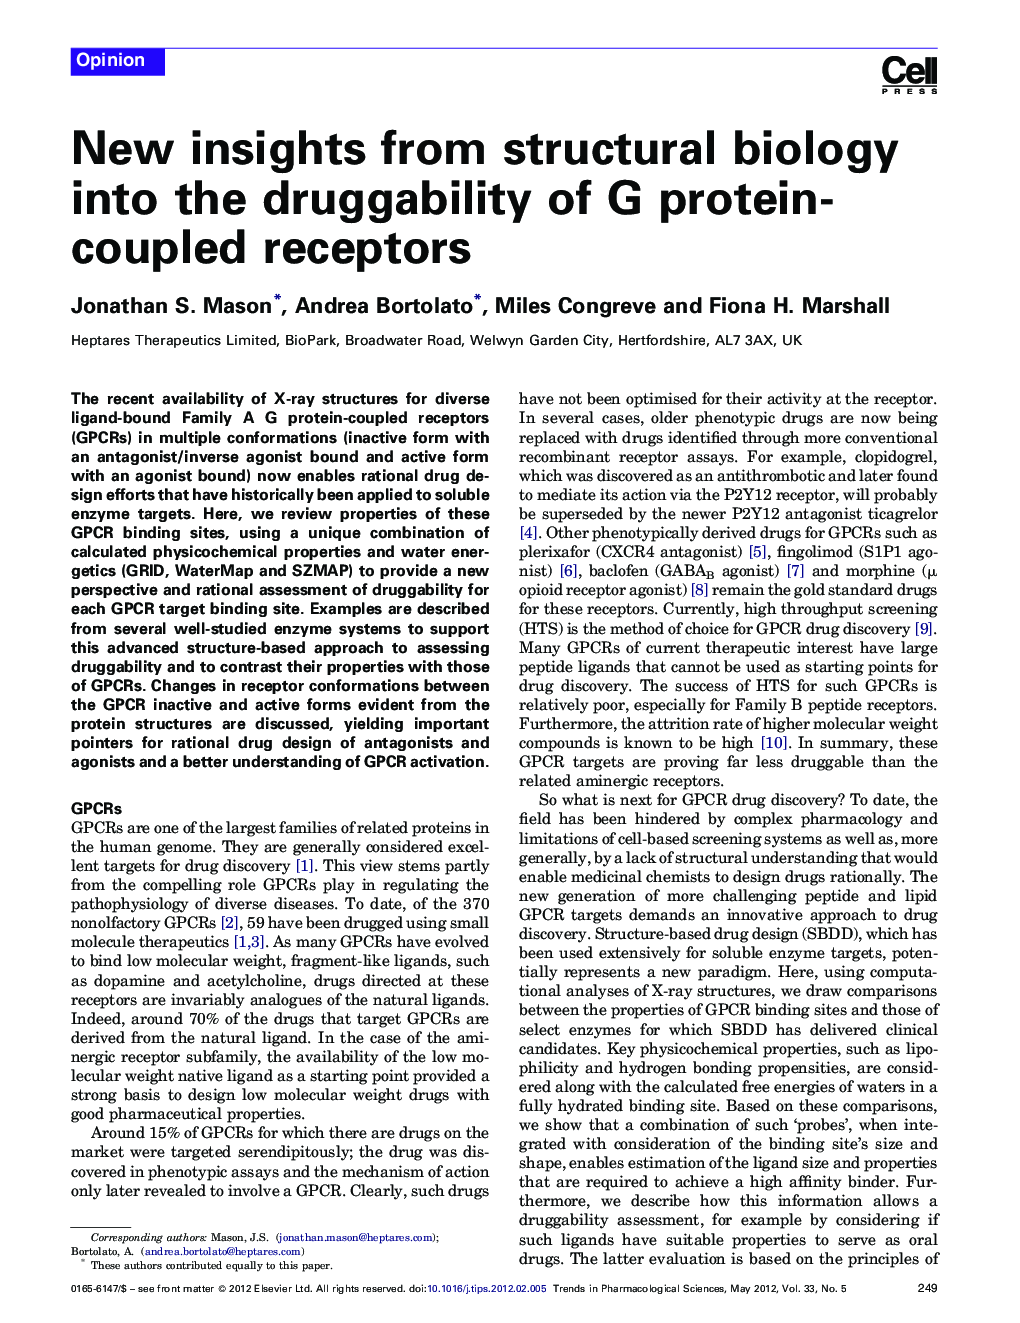 New insights from structural biology into the druggability of G protein-coupled receptors